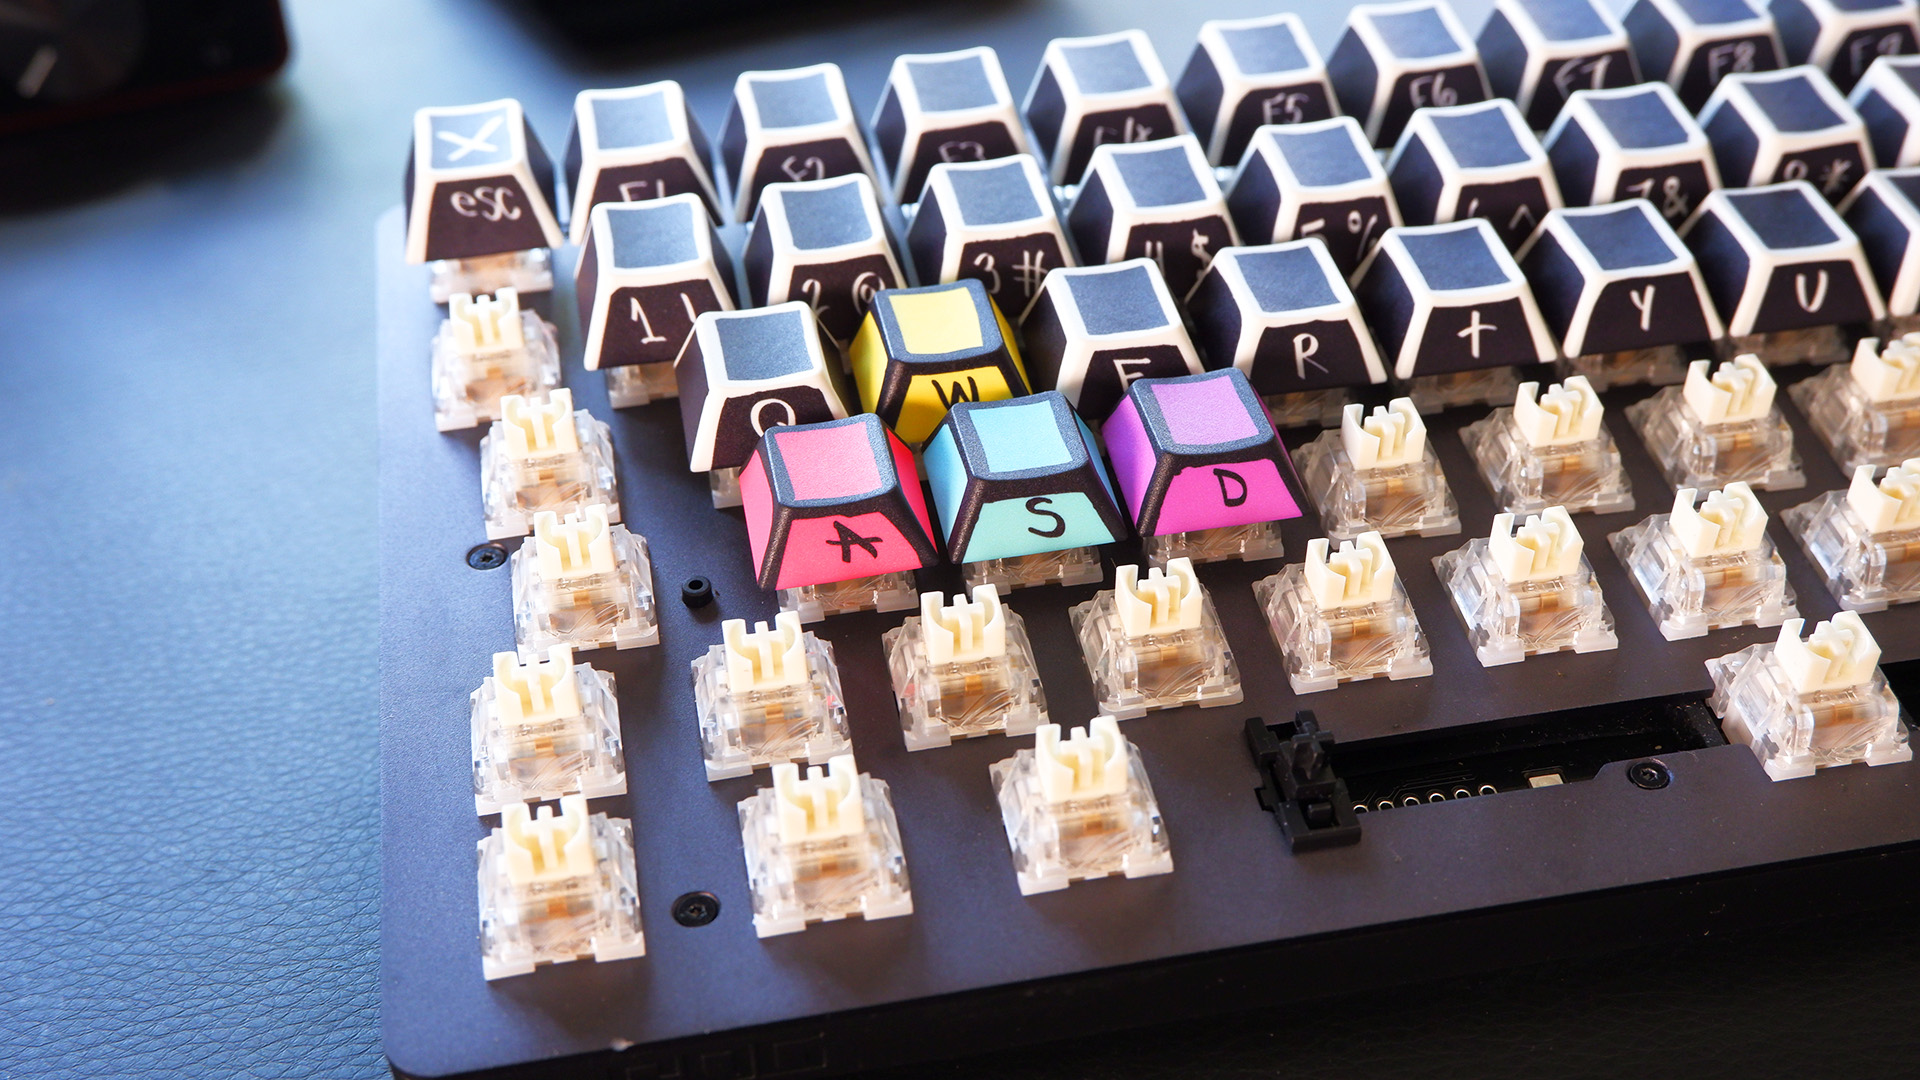 Keycap delivery! This limited edition keycap set from Glorious has turned my clean-cut keyboard into crude doodles and I'm surprisingly here for it